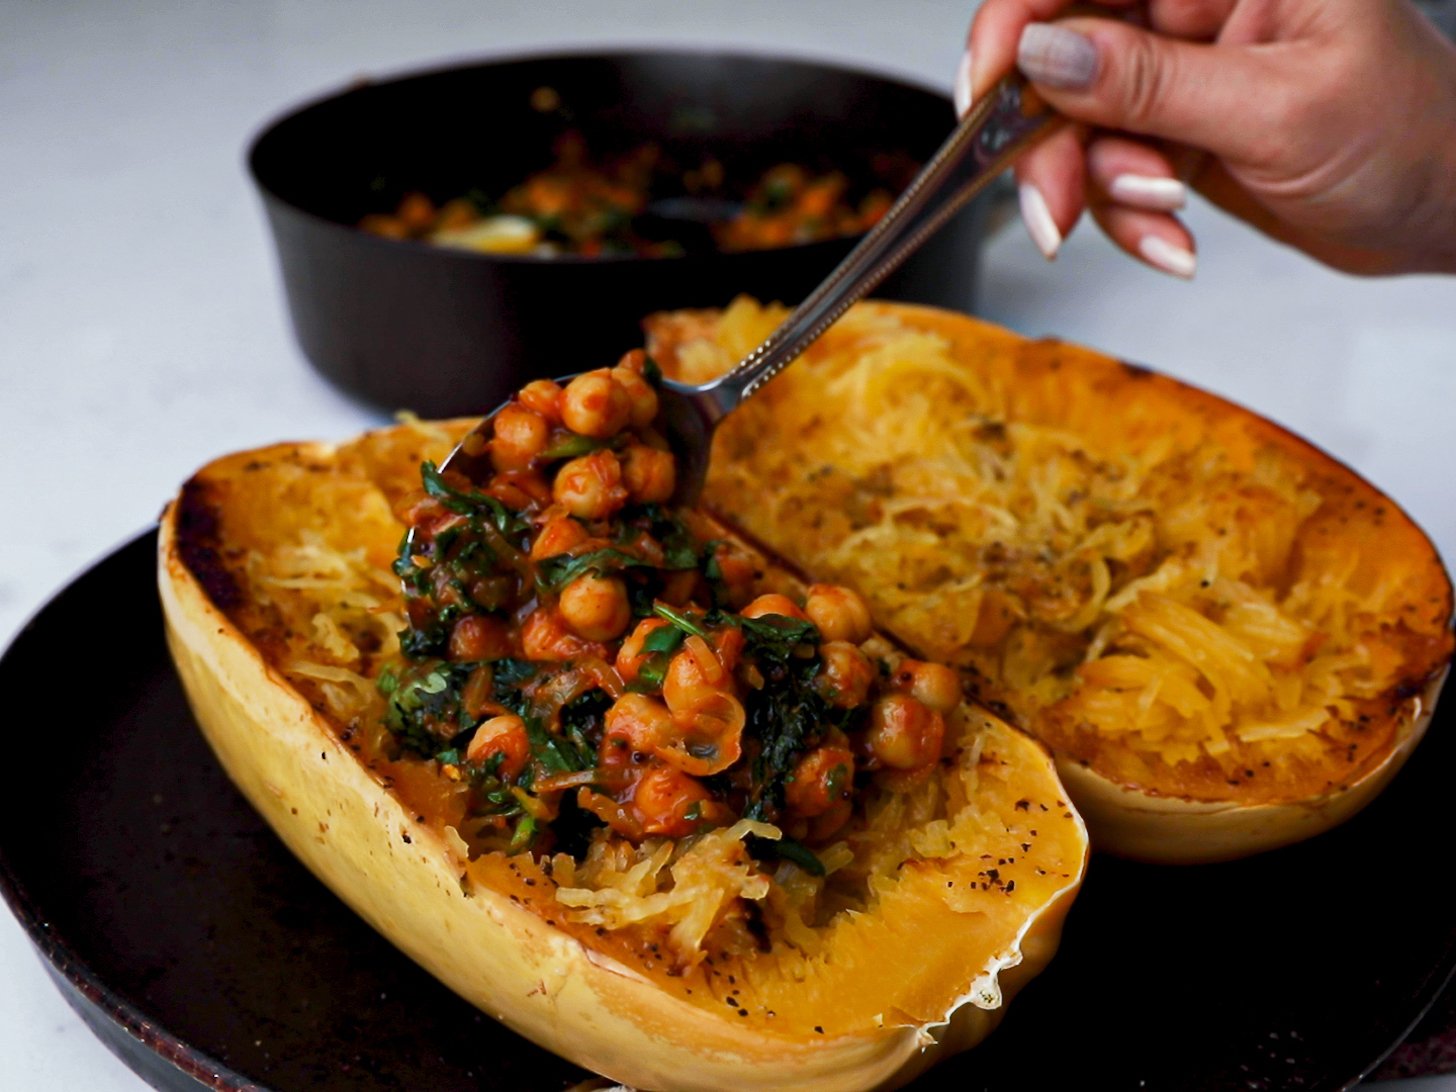 A hand holding a spoonful of chickpea and greens curry to stuff a cooked spaghetti squash half.